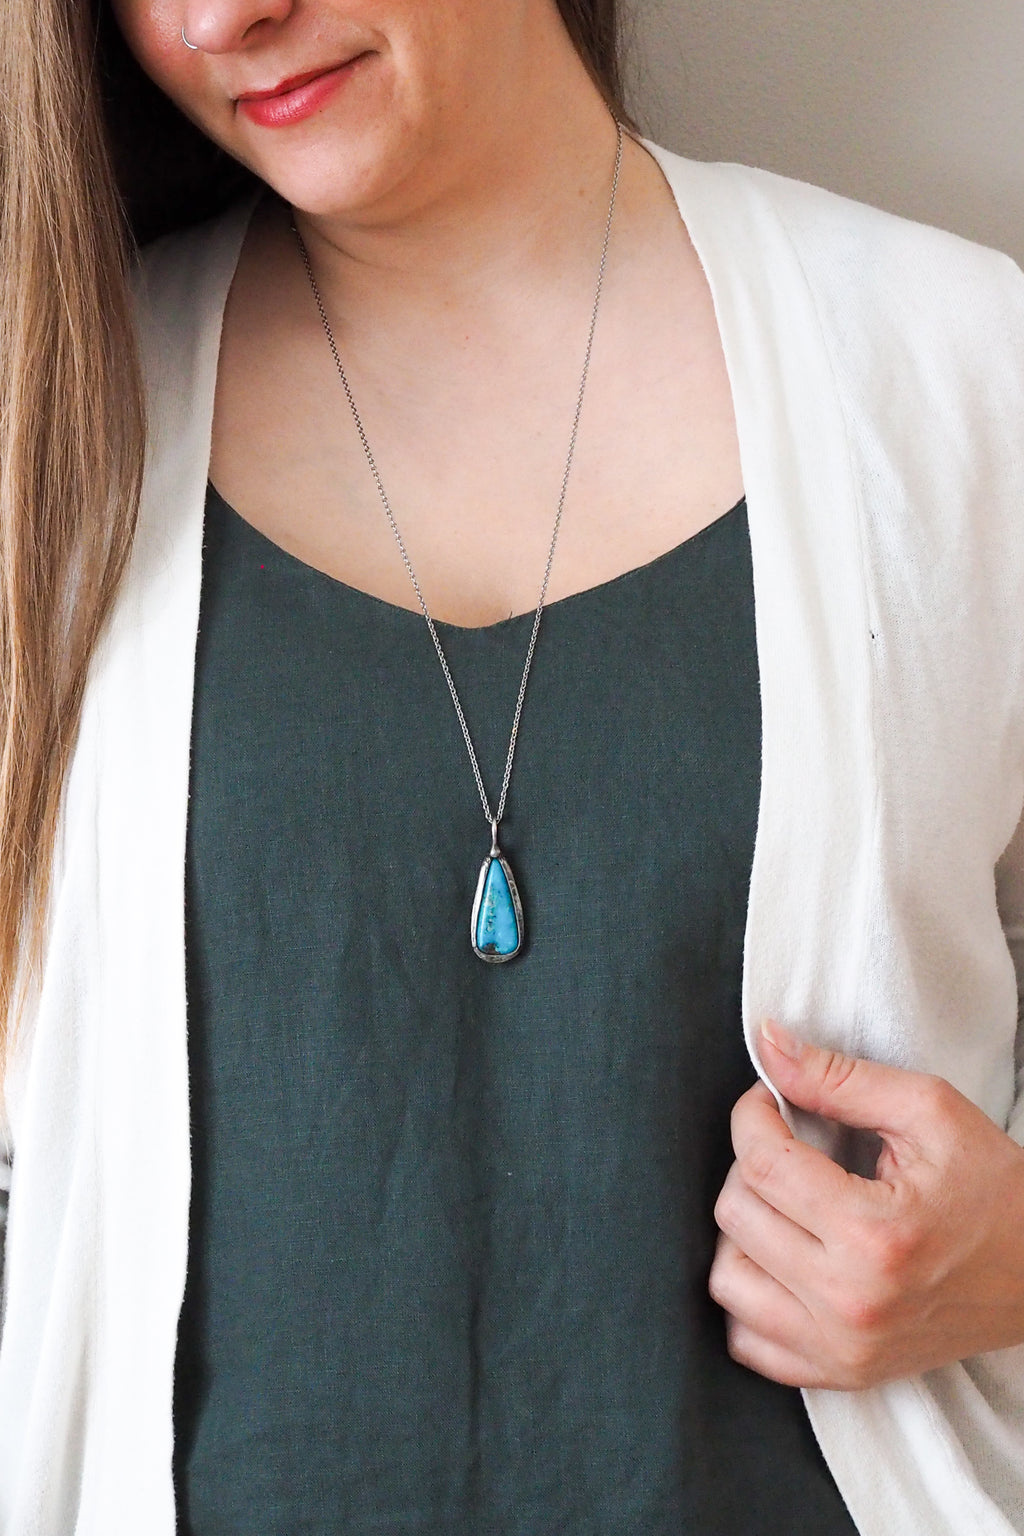 bright blue kingman turquoise gemstone healing crystal talisman statement necklace on woman in blue top with white cardigan